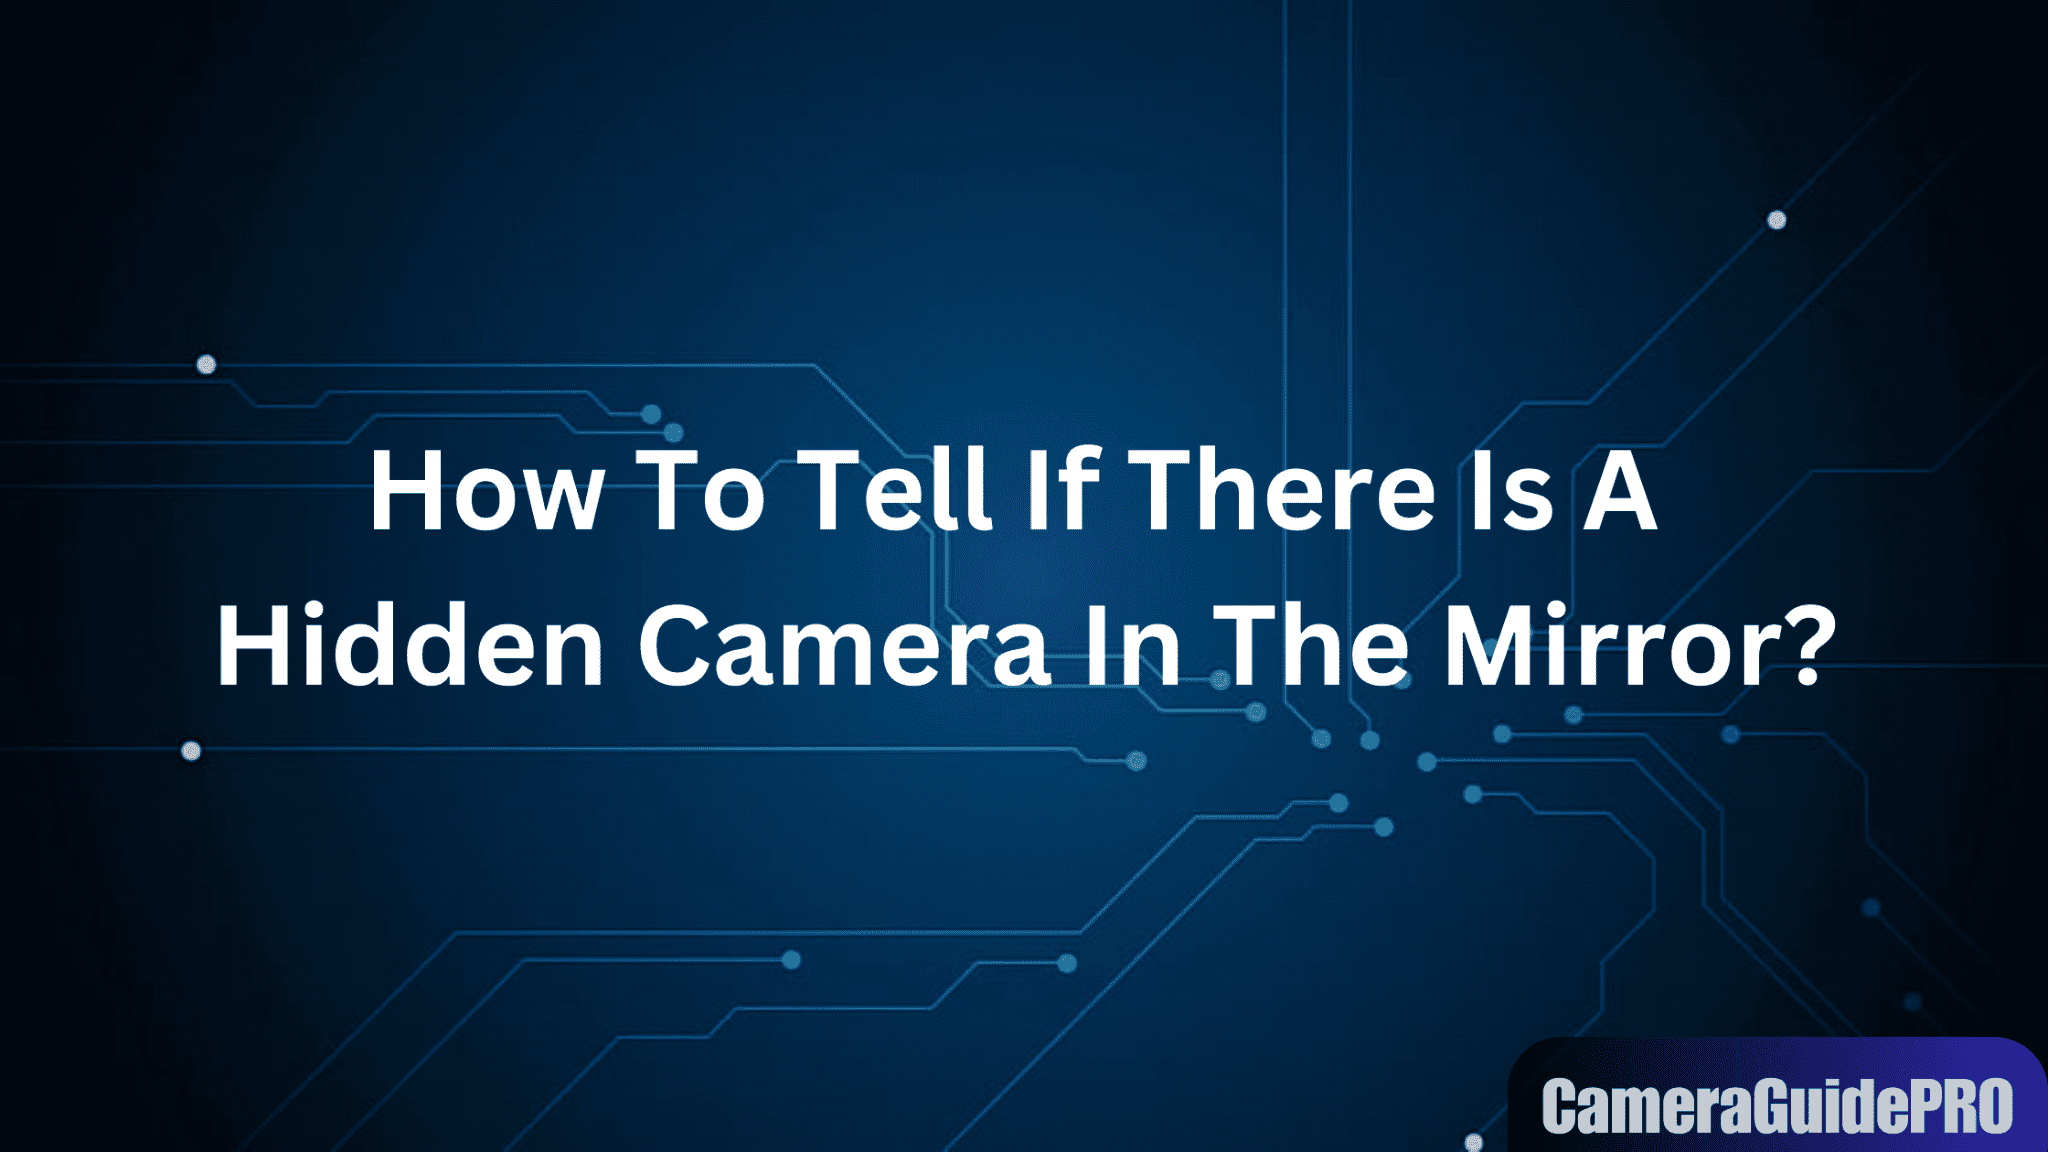 How To Tell If There Is A Hidden Camera In The Mirror